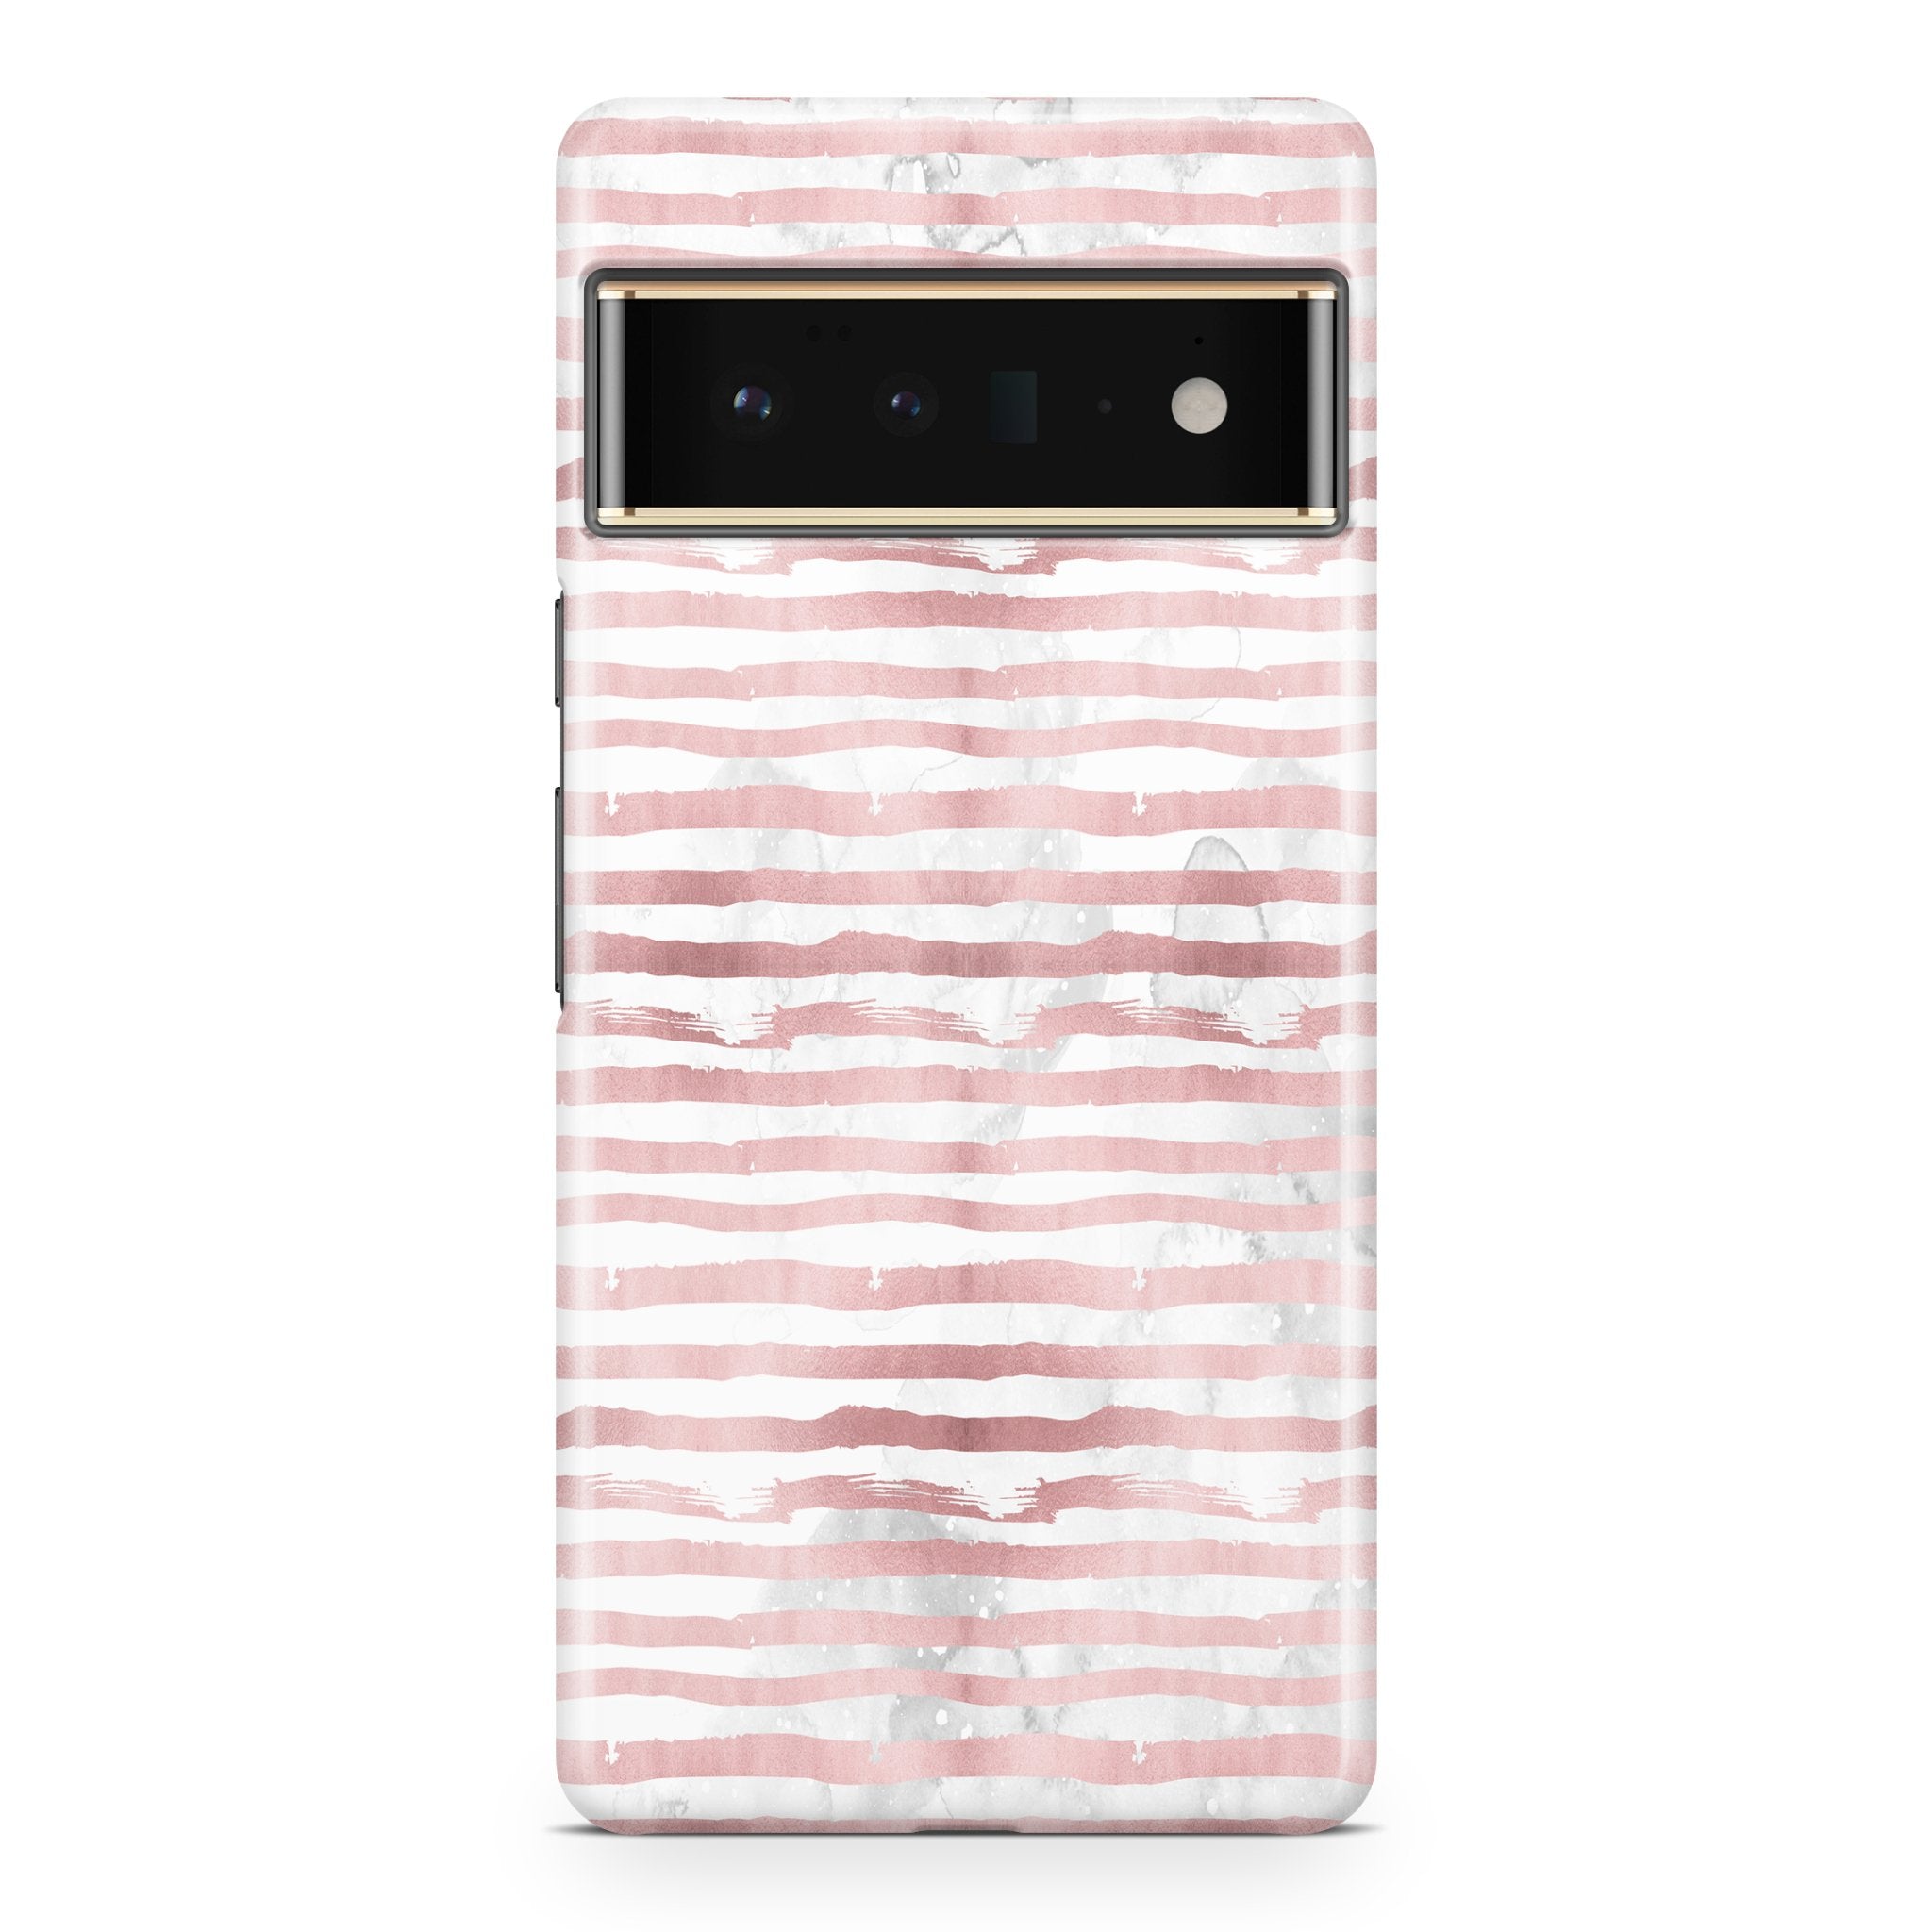 Lipstick Marble - Google phone case designs by CaseSwagger